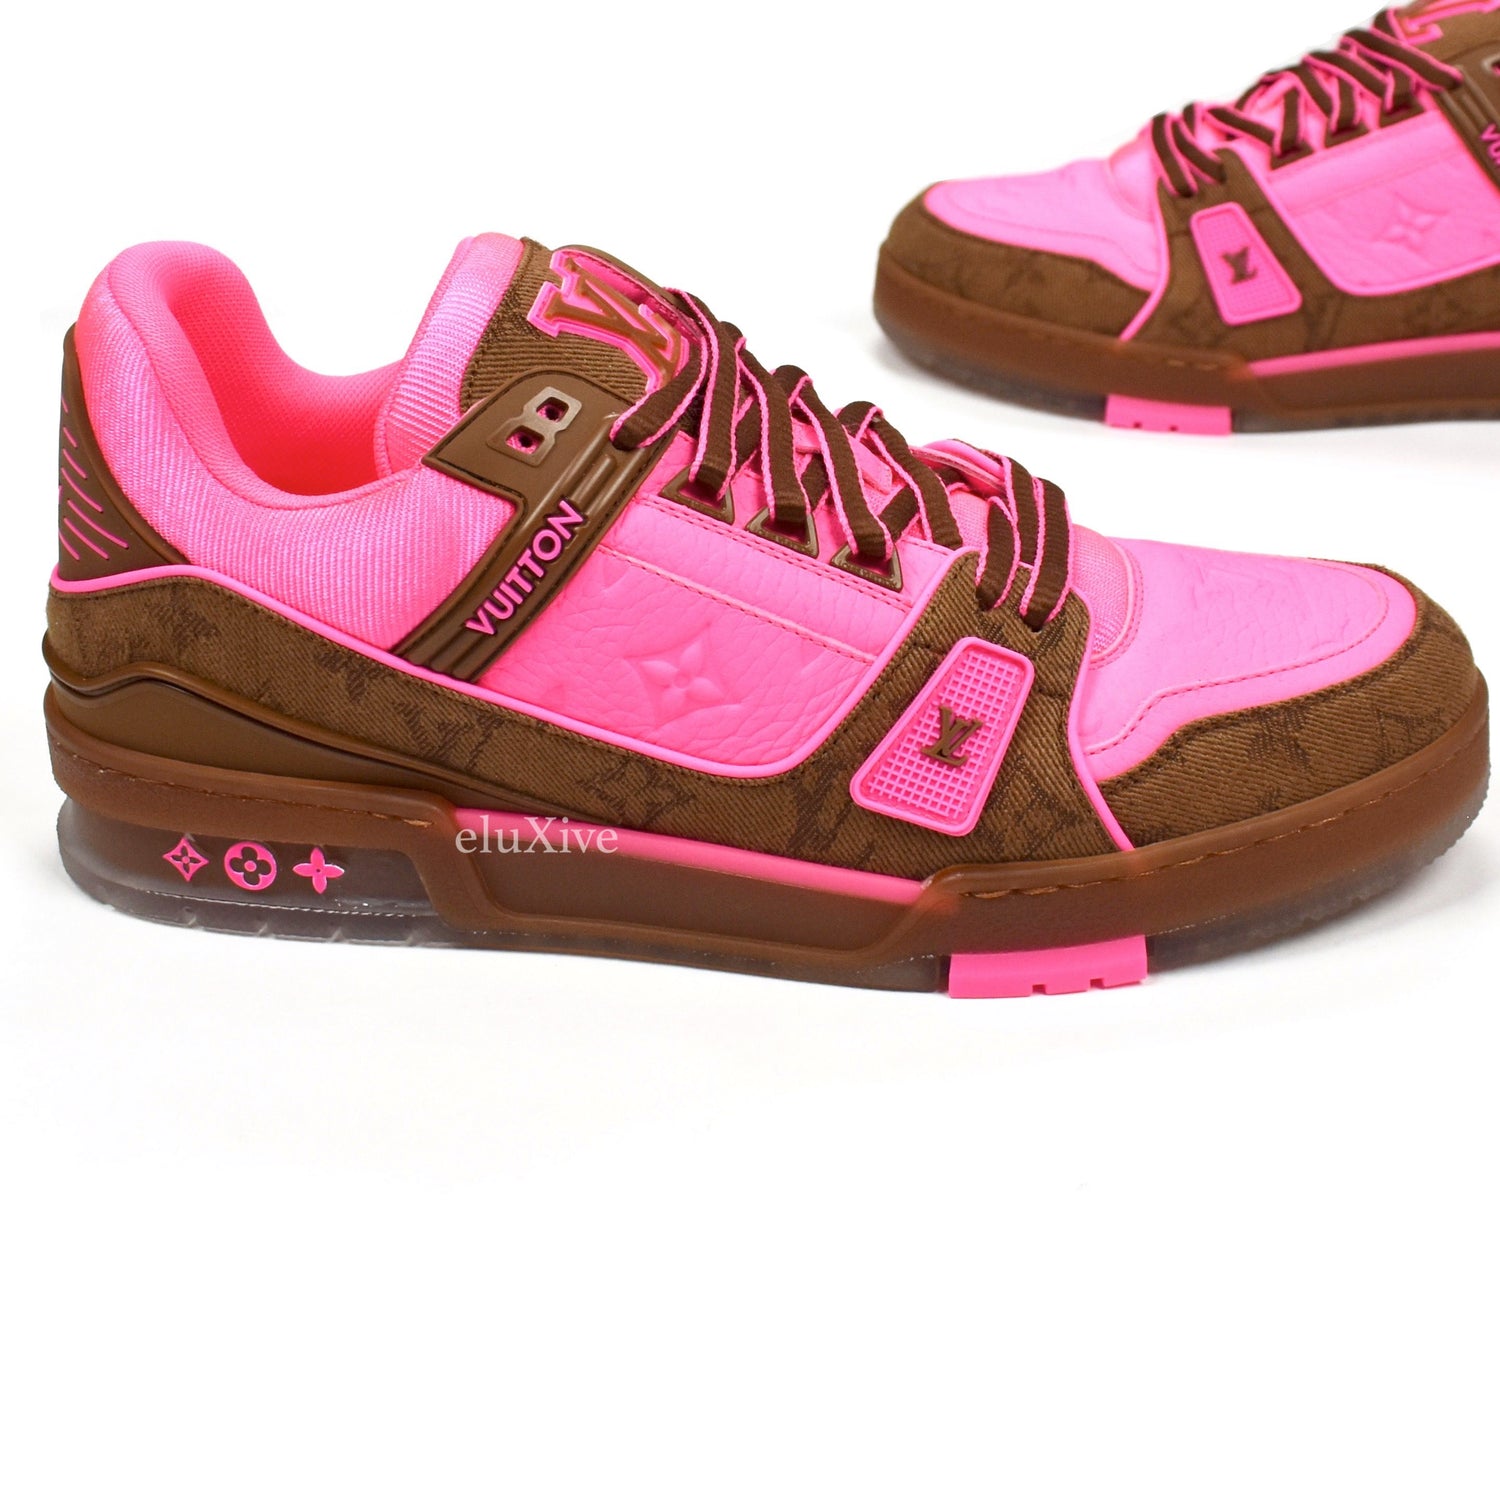 LOUIS VUITTON Leather LV Trainer Sneakers Pink/Brown | Luxity